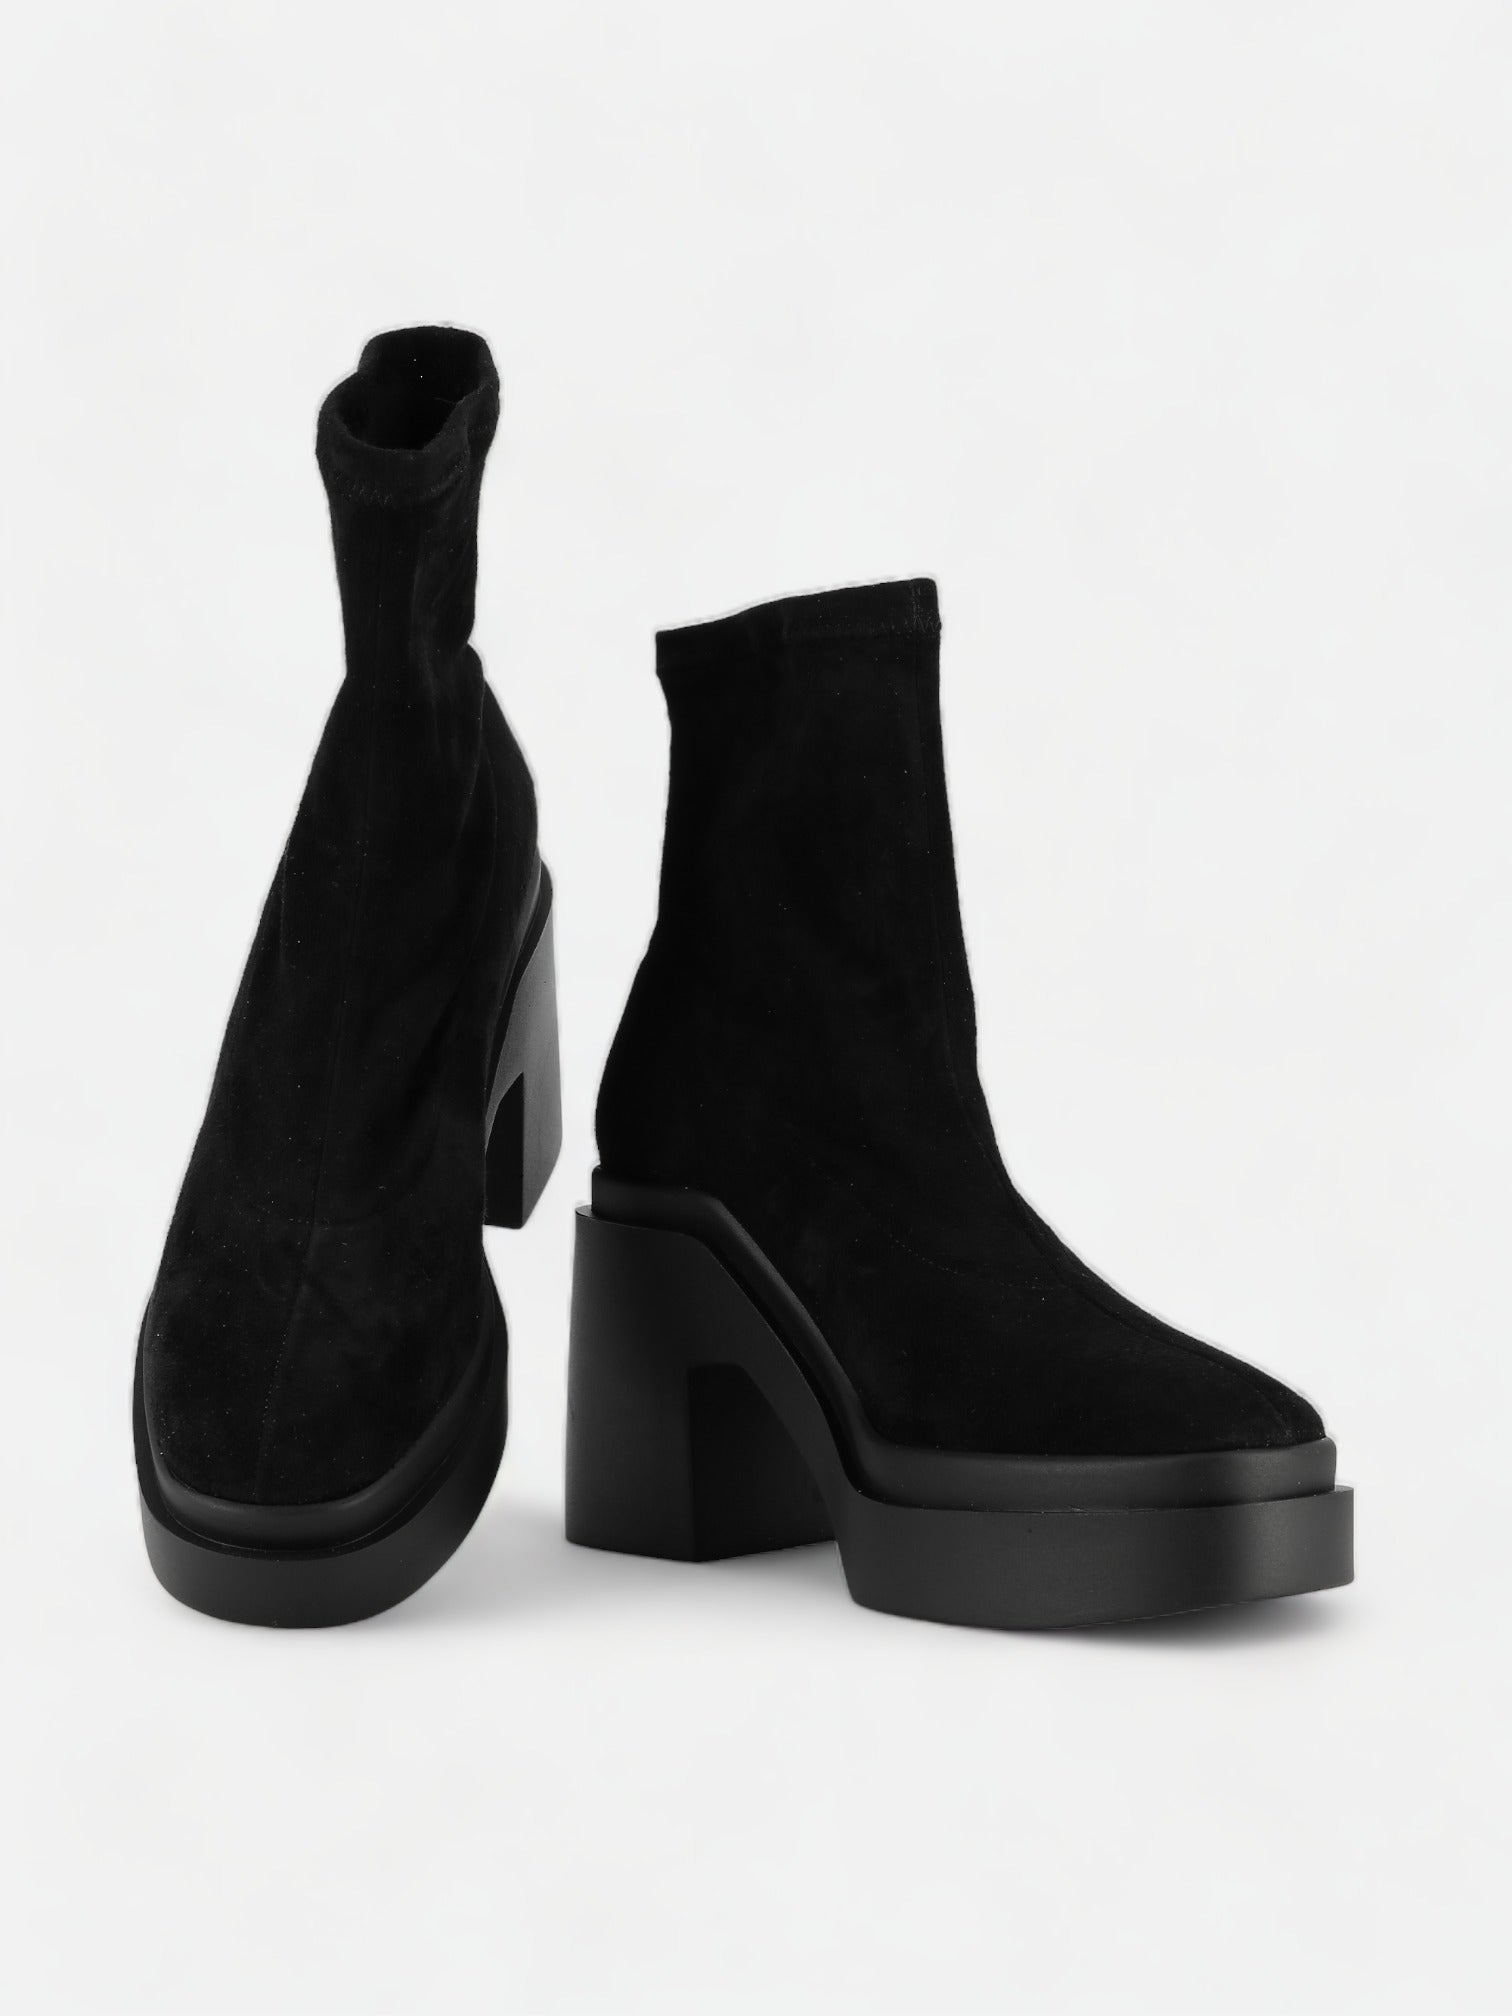 ANKLE BOOTS - NINA ankle boots, suede leather black - 3606063979757 - Clergerie Paris - Europe